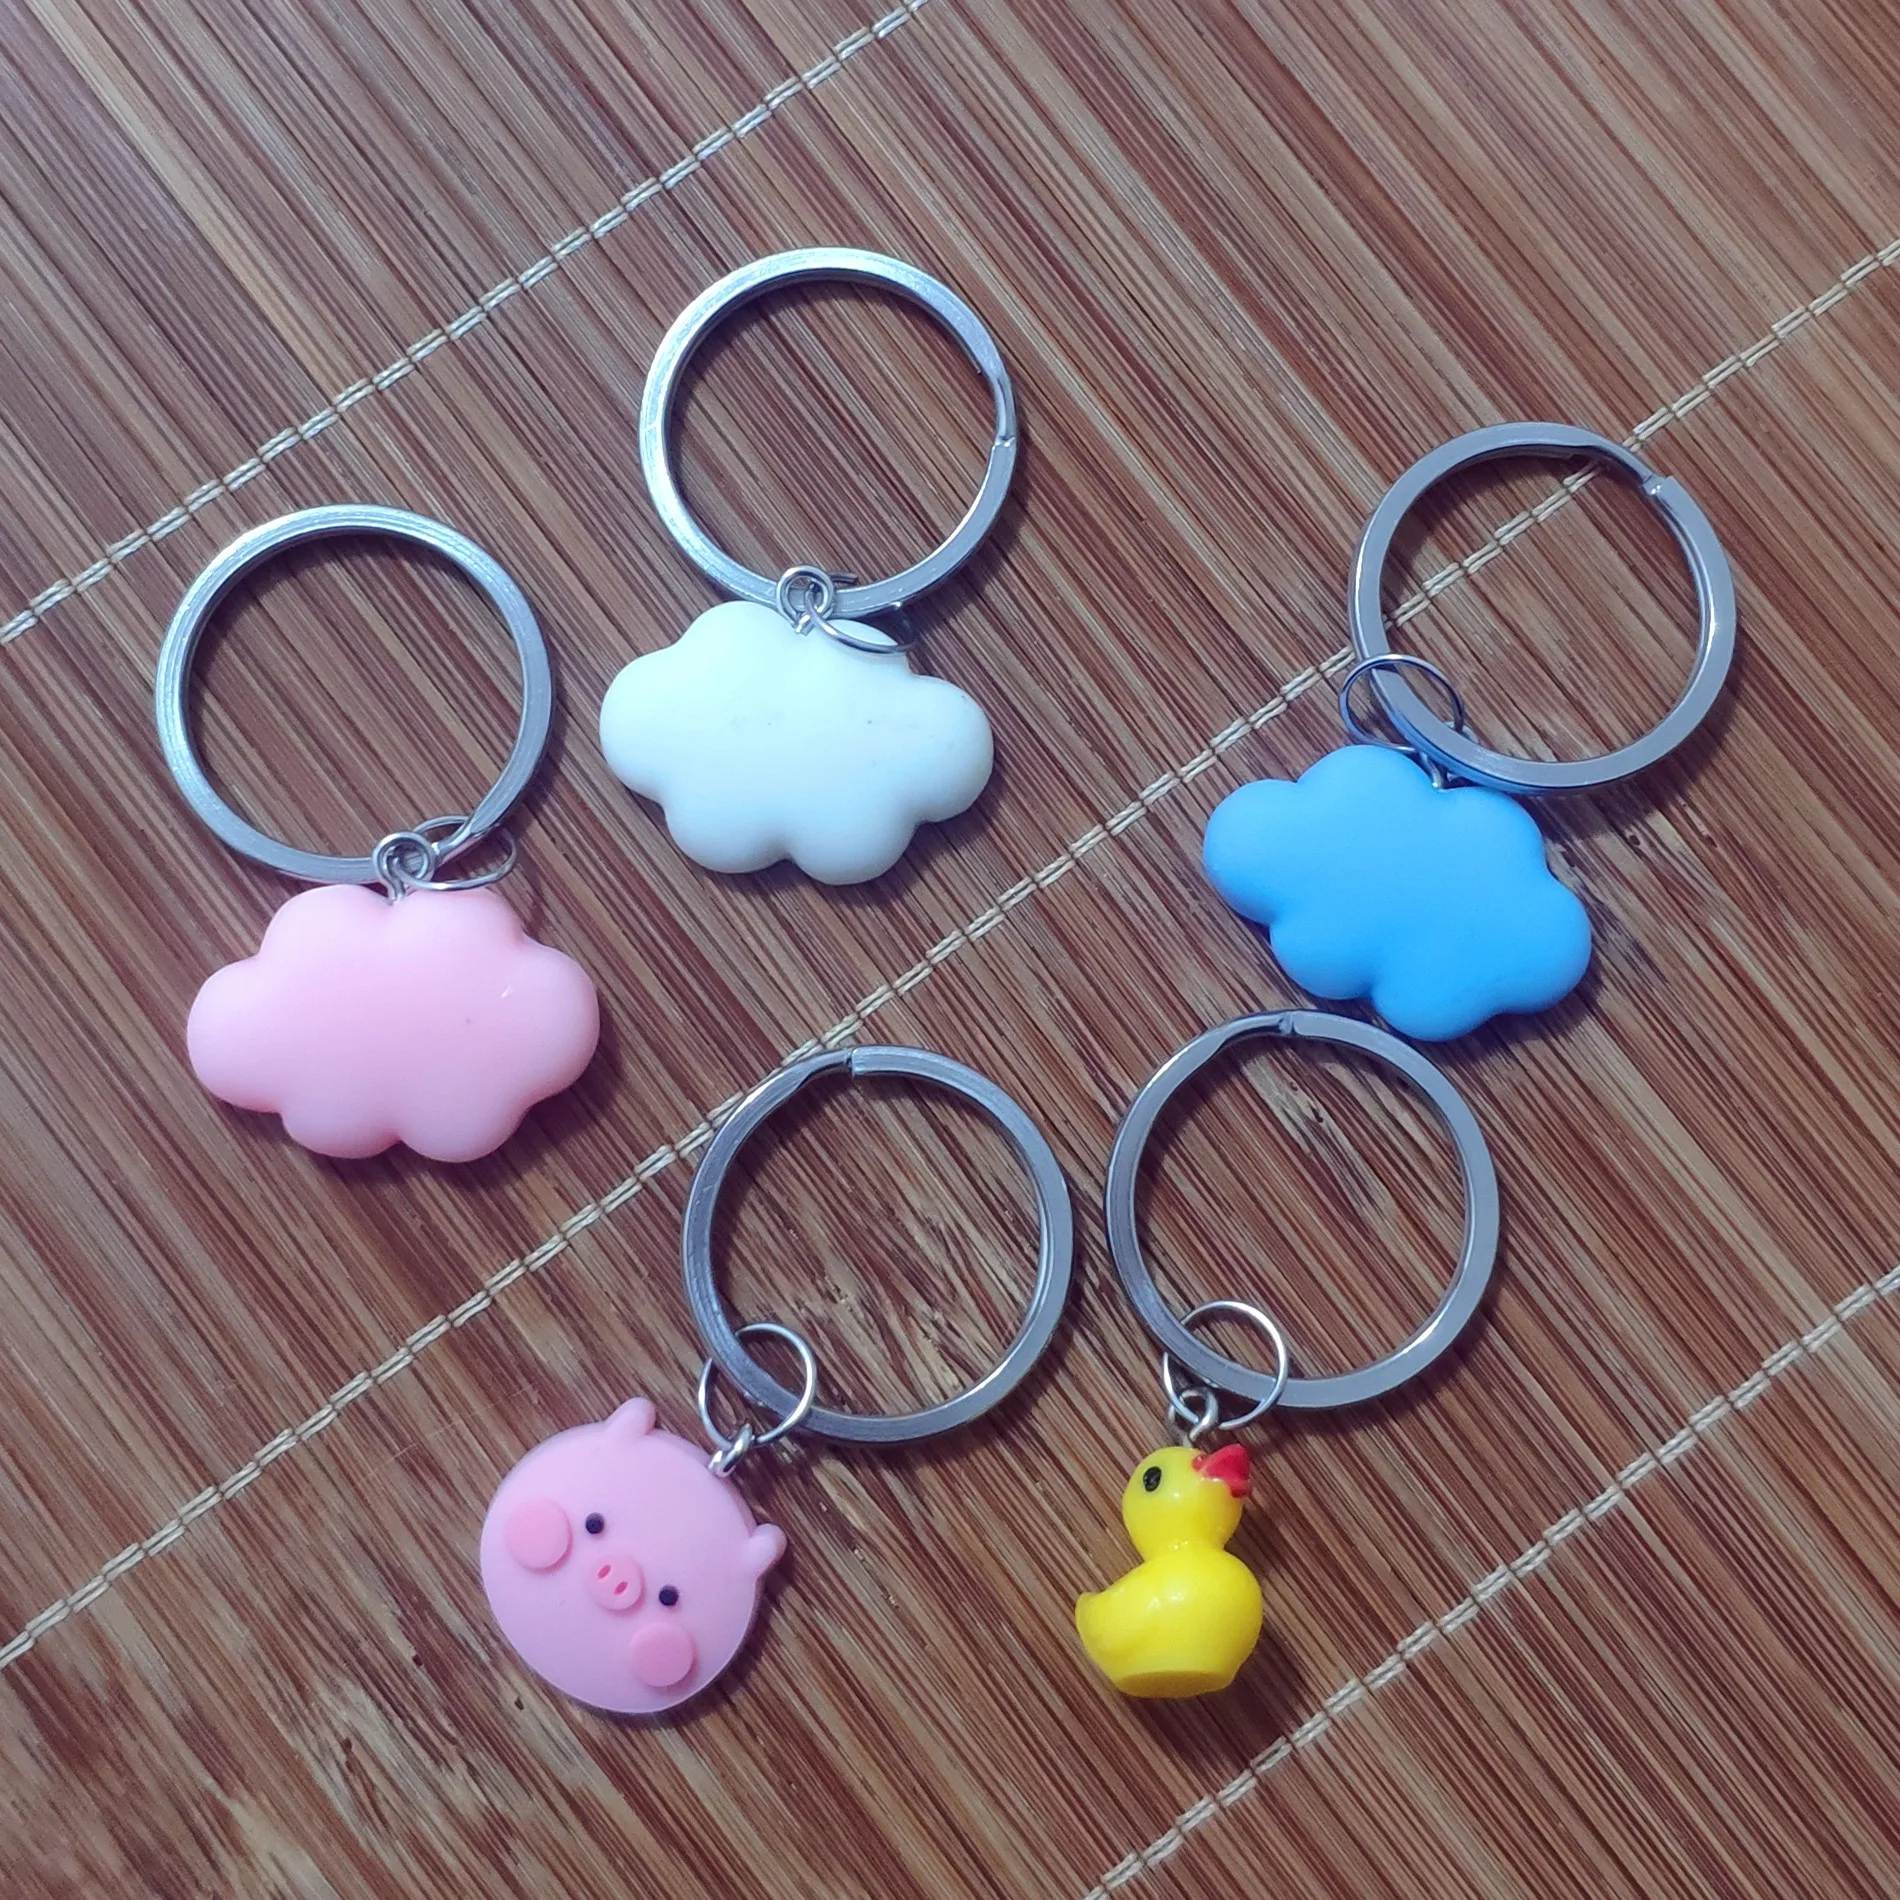 

Keyring Cloud Pig Duck Lanyard for Keys Cute Stainless Steel Best Friend Lovely Silicone Couple Gift Cartoon Ornaments Carabiner